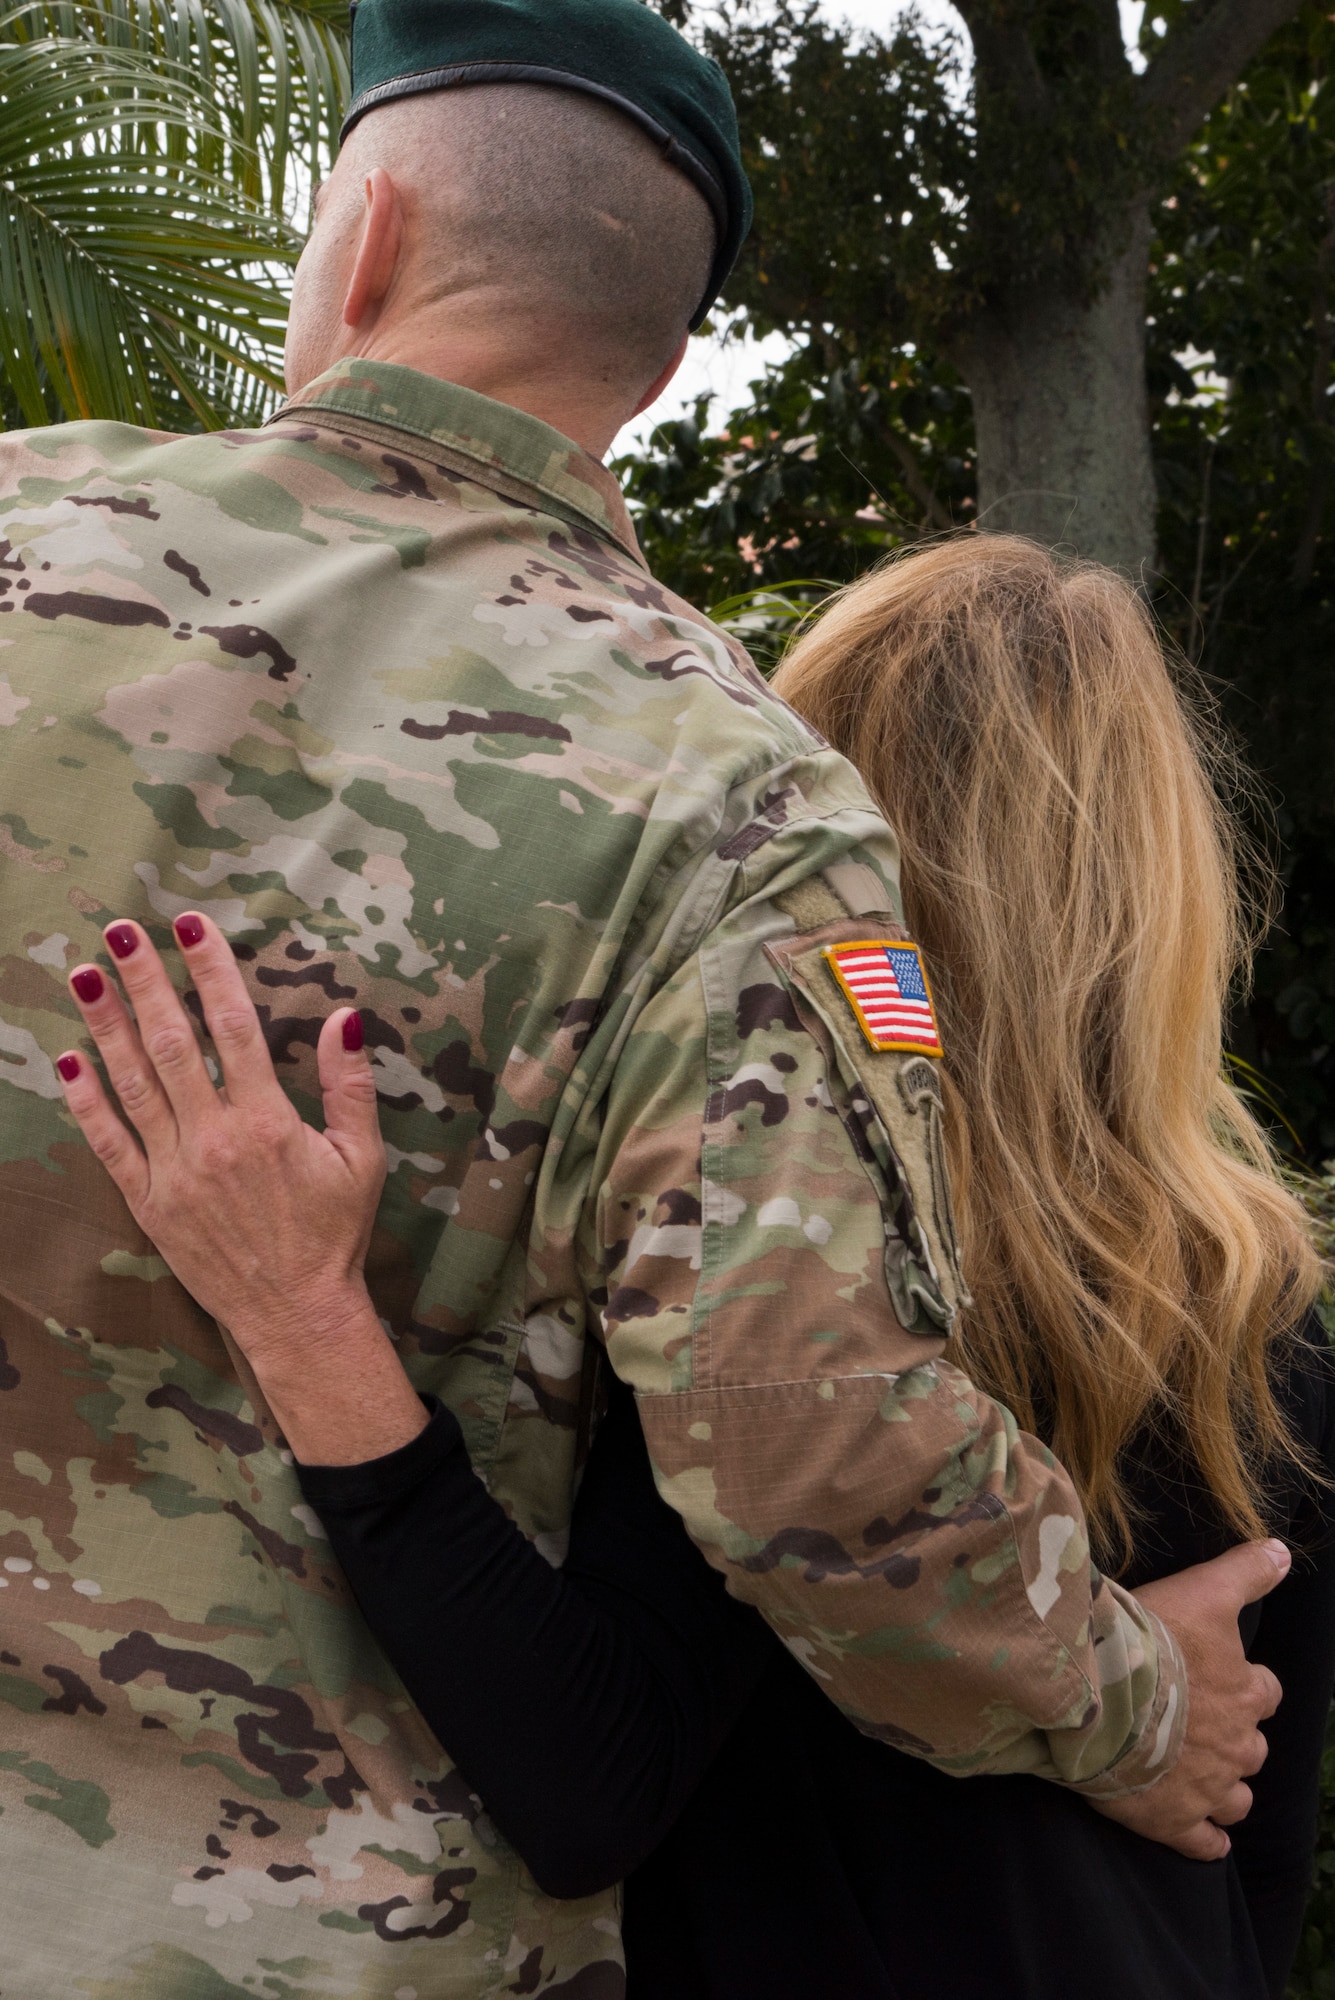 The spouse of Master Sgt. John Chapman, a Congressional Medal of Honor recipient, attends a ceremony for U.S. Air Force Master Sgt. John Chapman at MacDill Air Force Base, Fla., Jan. 30, 2019.